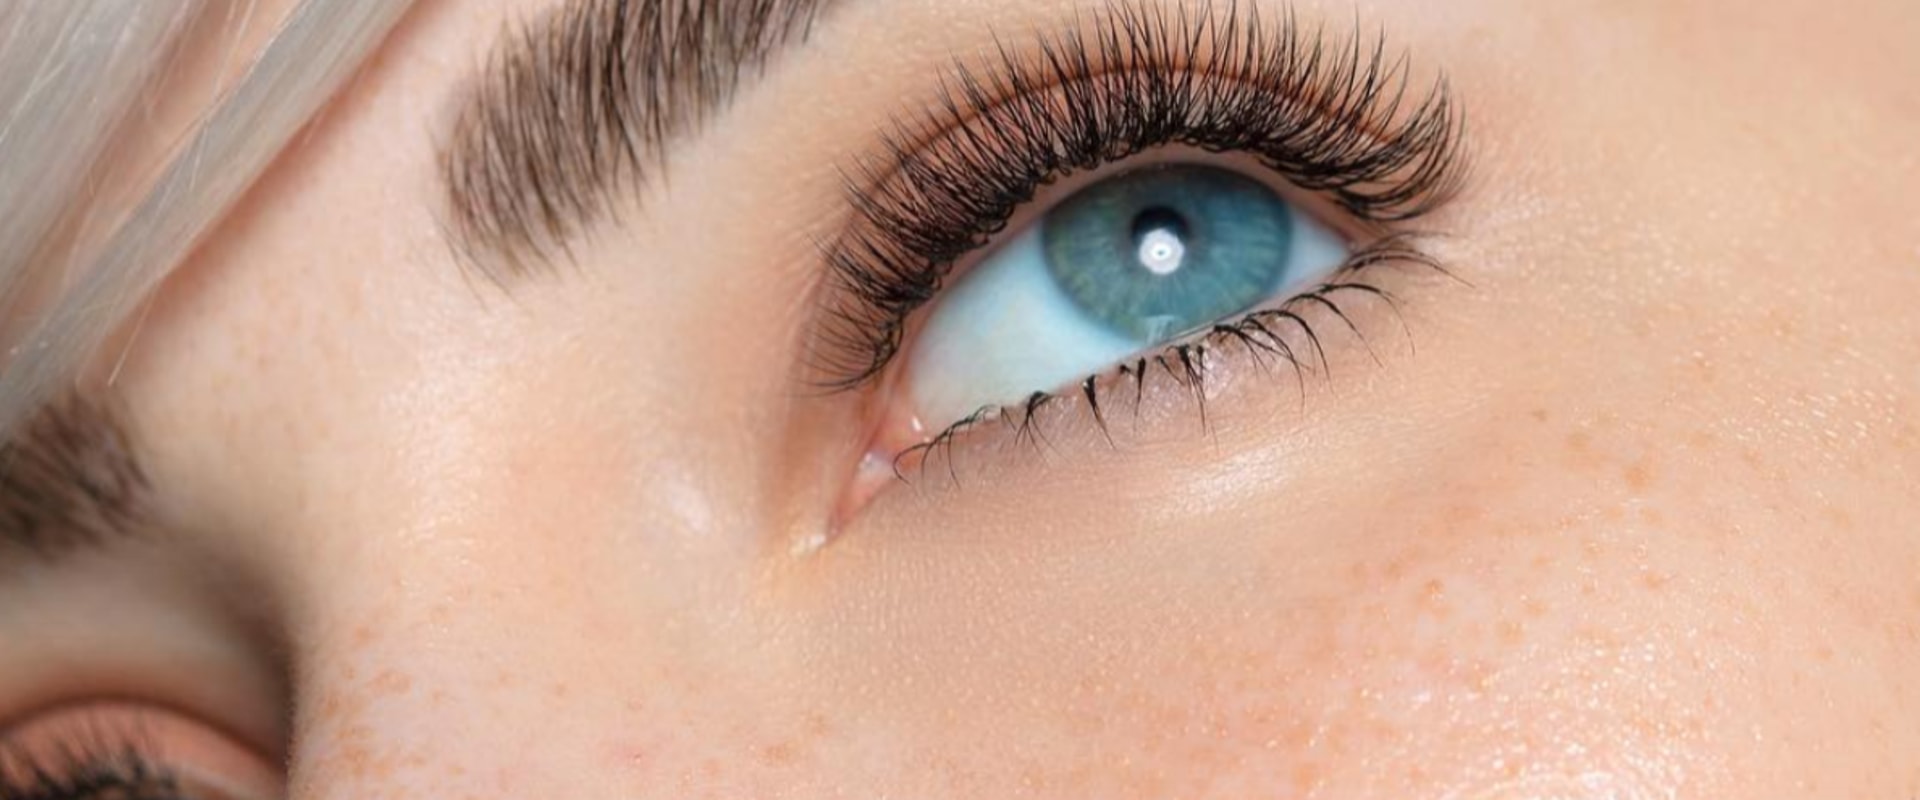 Understanding the Four Stages of Eyelash Growth